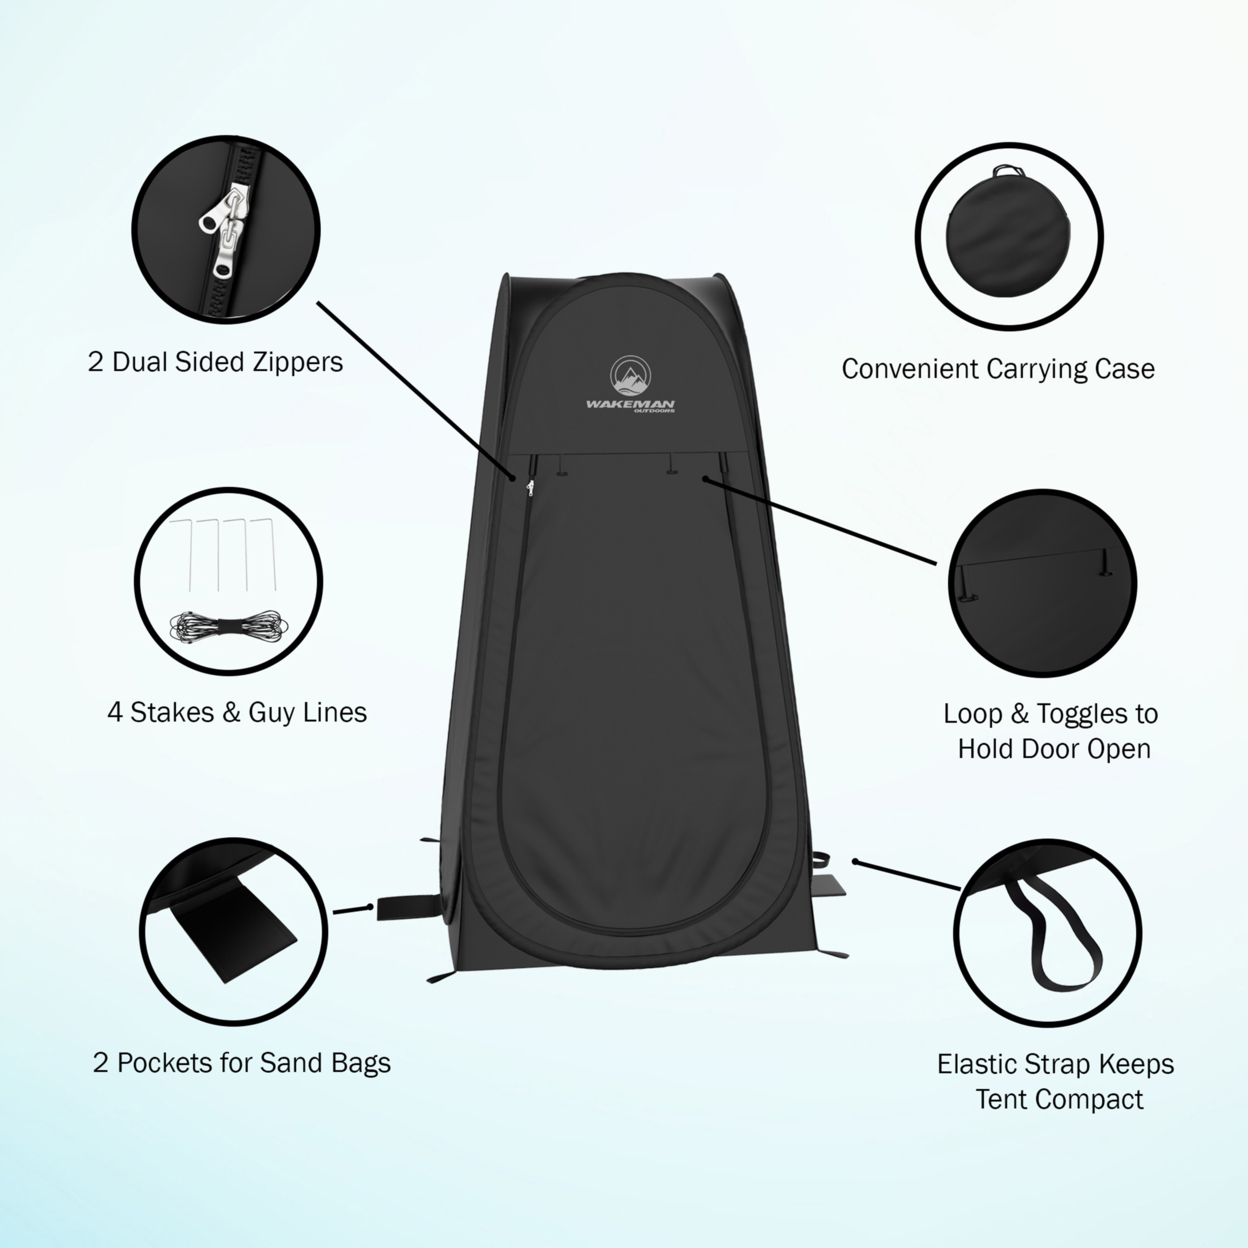 Portable Pop Up Pod- Instant Privacy, Shower & Changing Tent- Collapsible Outdoor Shelter For Camping, Beach & Rain With Carry Bag